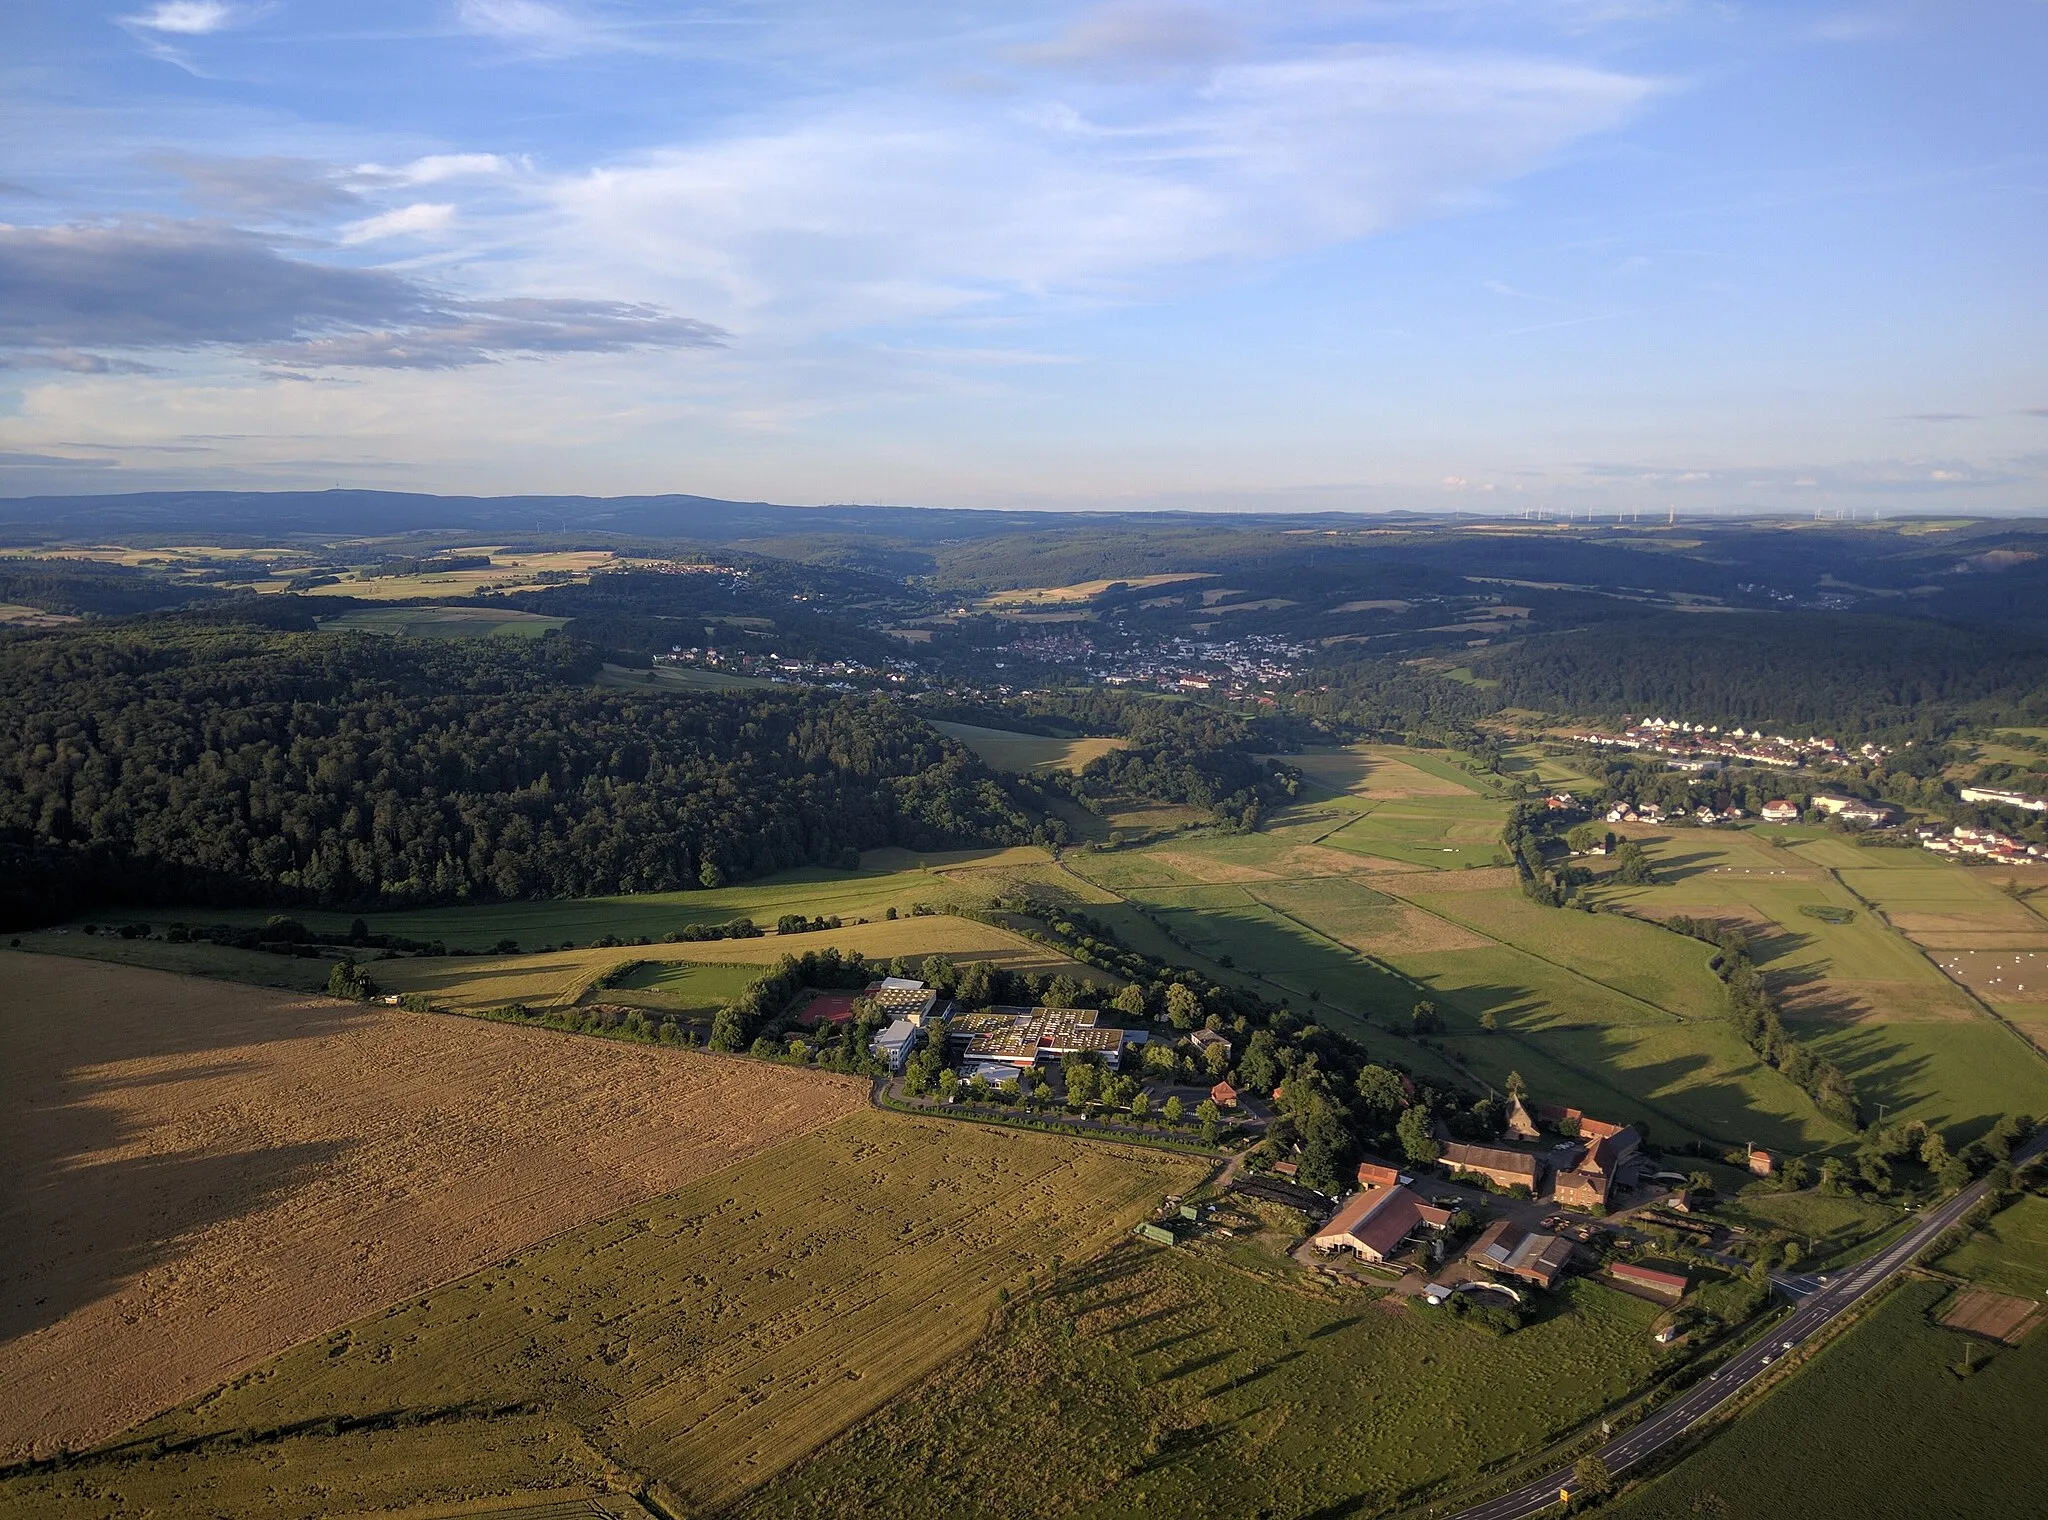 Photo showing: Aerial view of Konradsdorf from the southwestern direction (Viewing angle 61° mag. alignment) at an altitude of 478m above sea level.
The town in the background is Ortenberg.